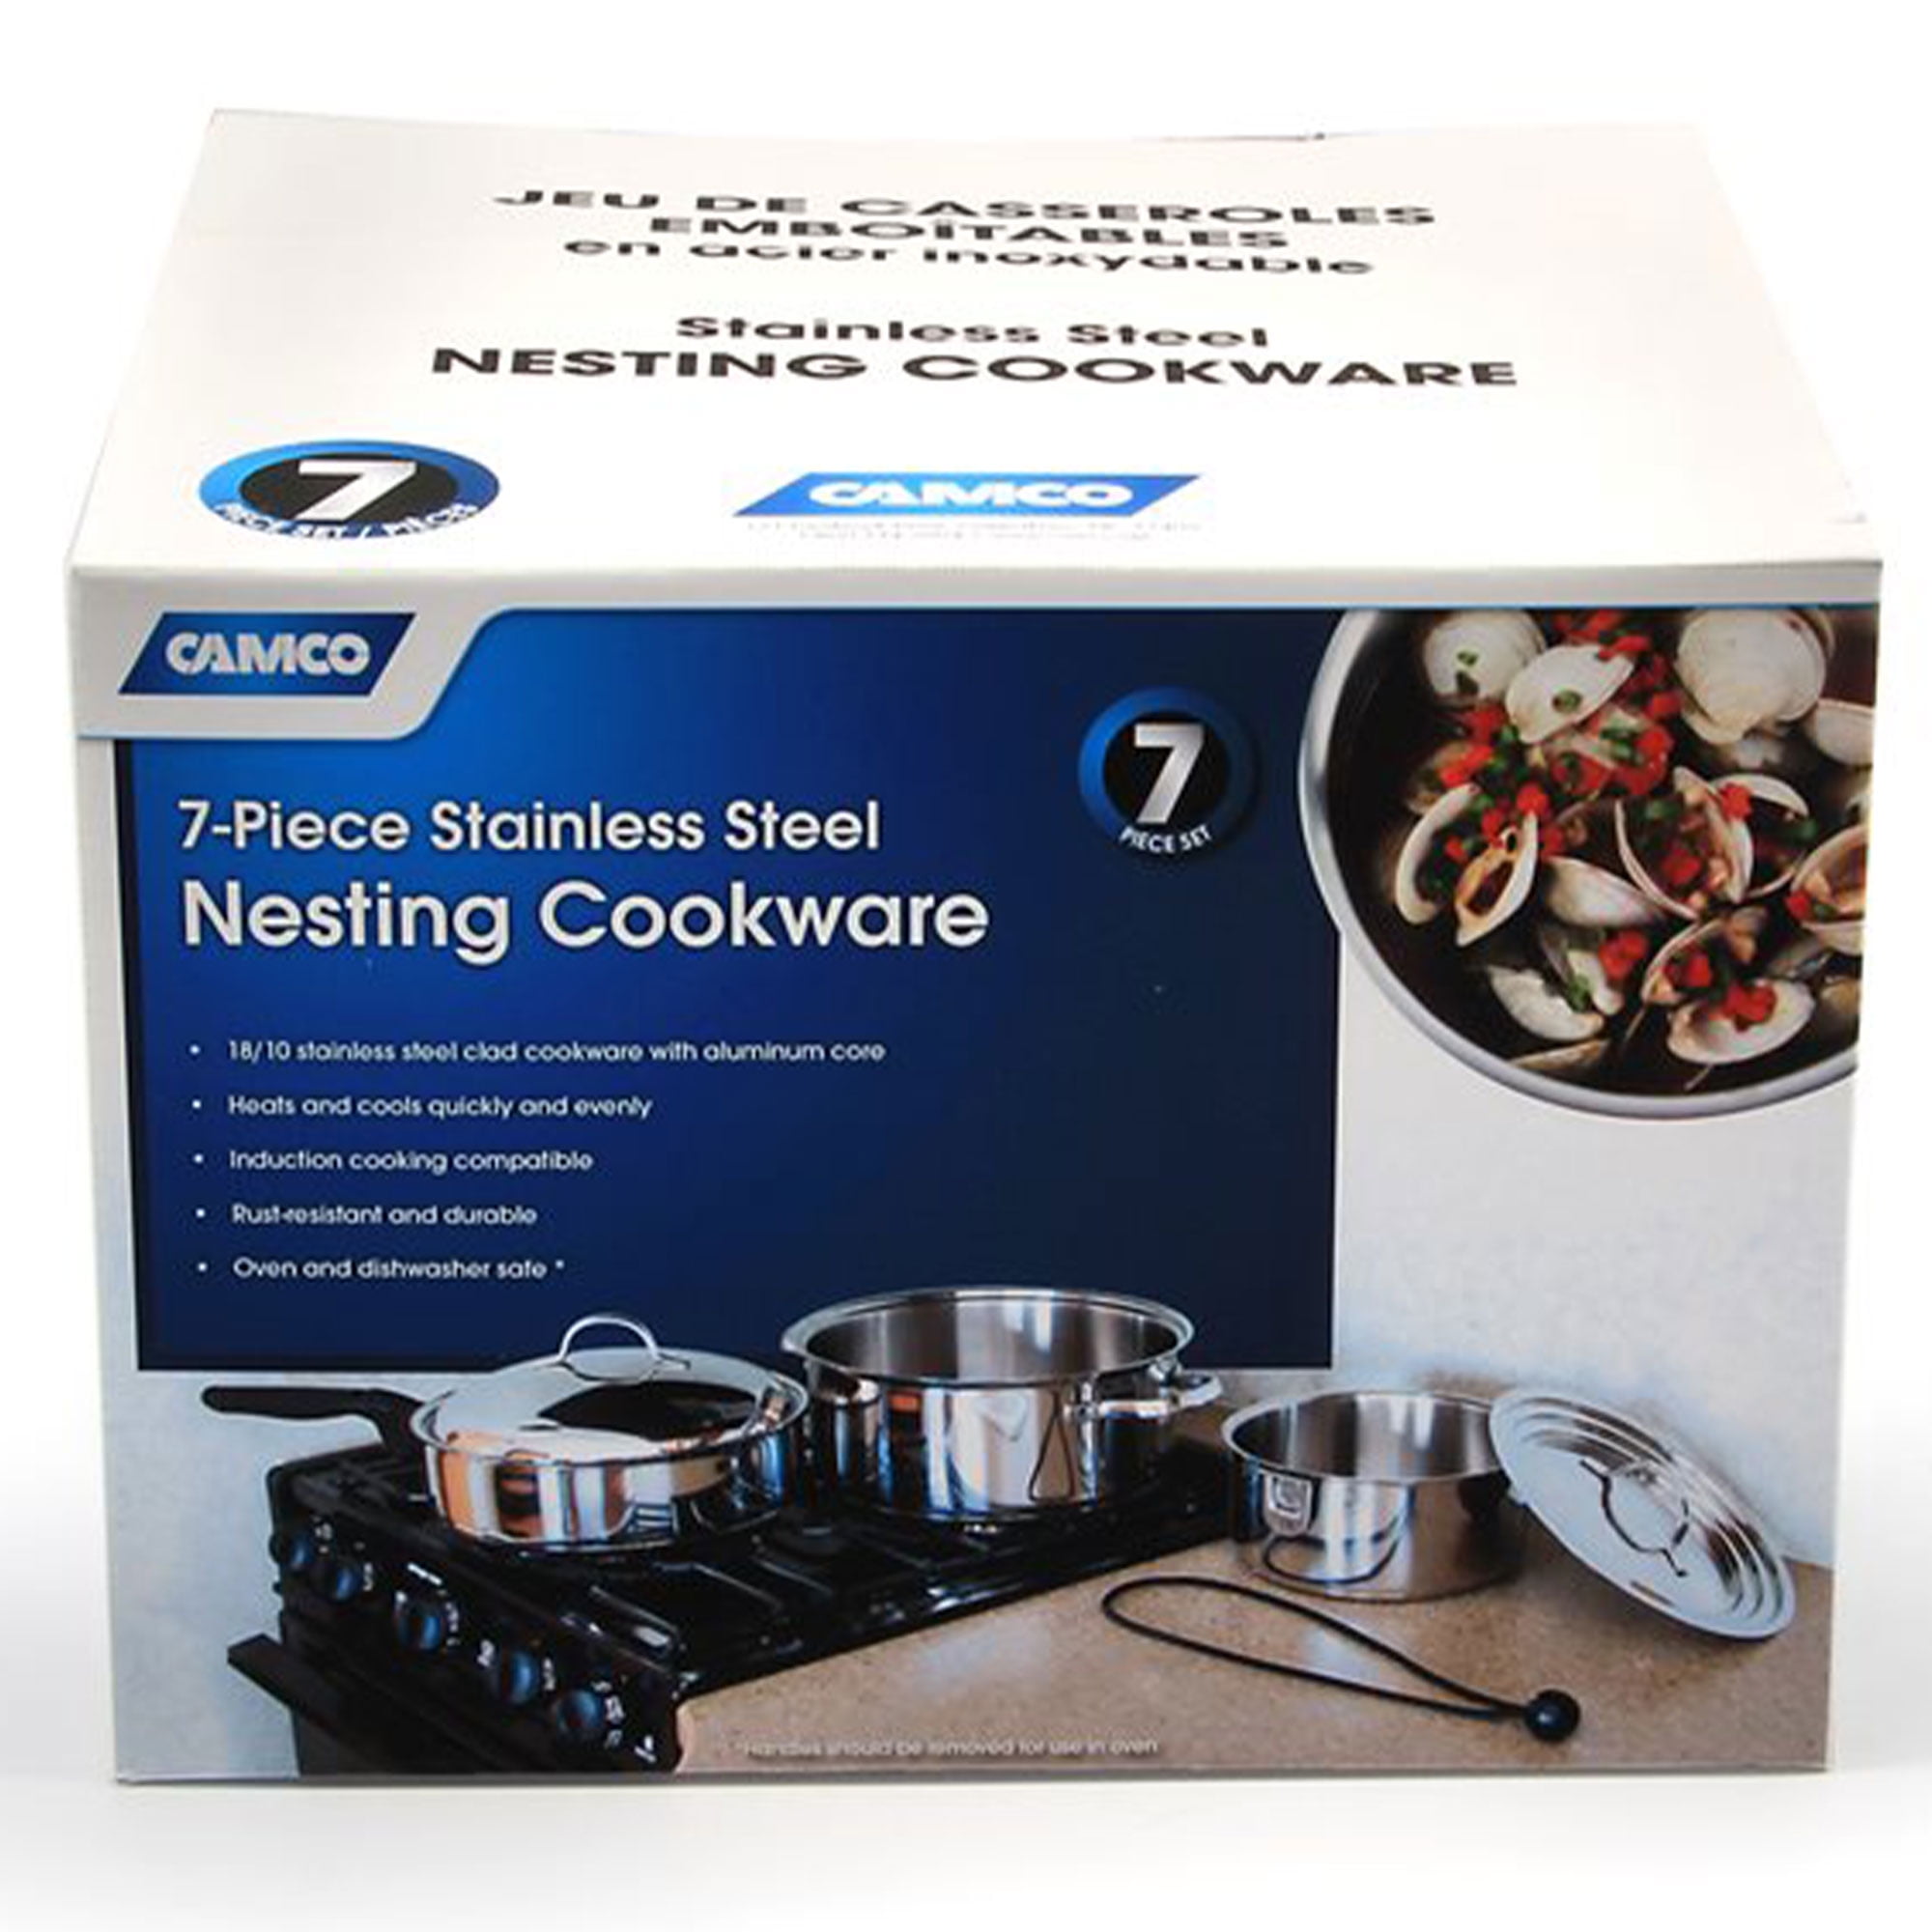 Camco 7-Piece Stainless Steel Nesting Cookware Set 43920 - The